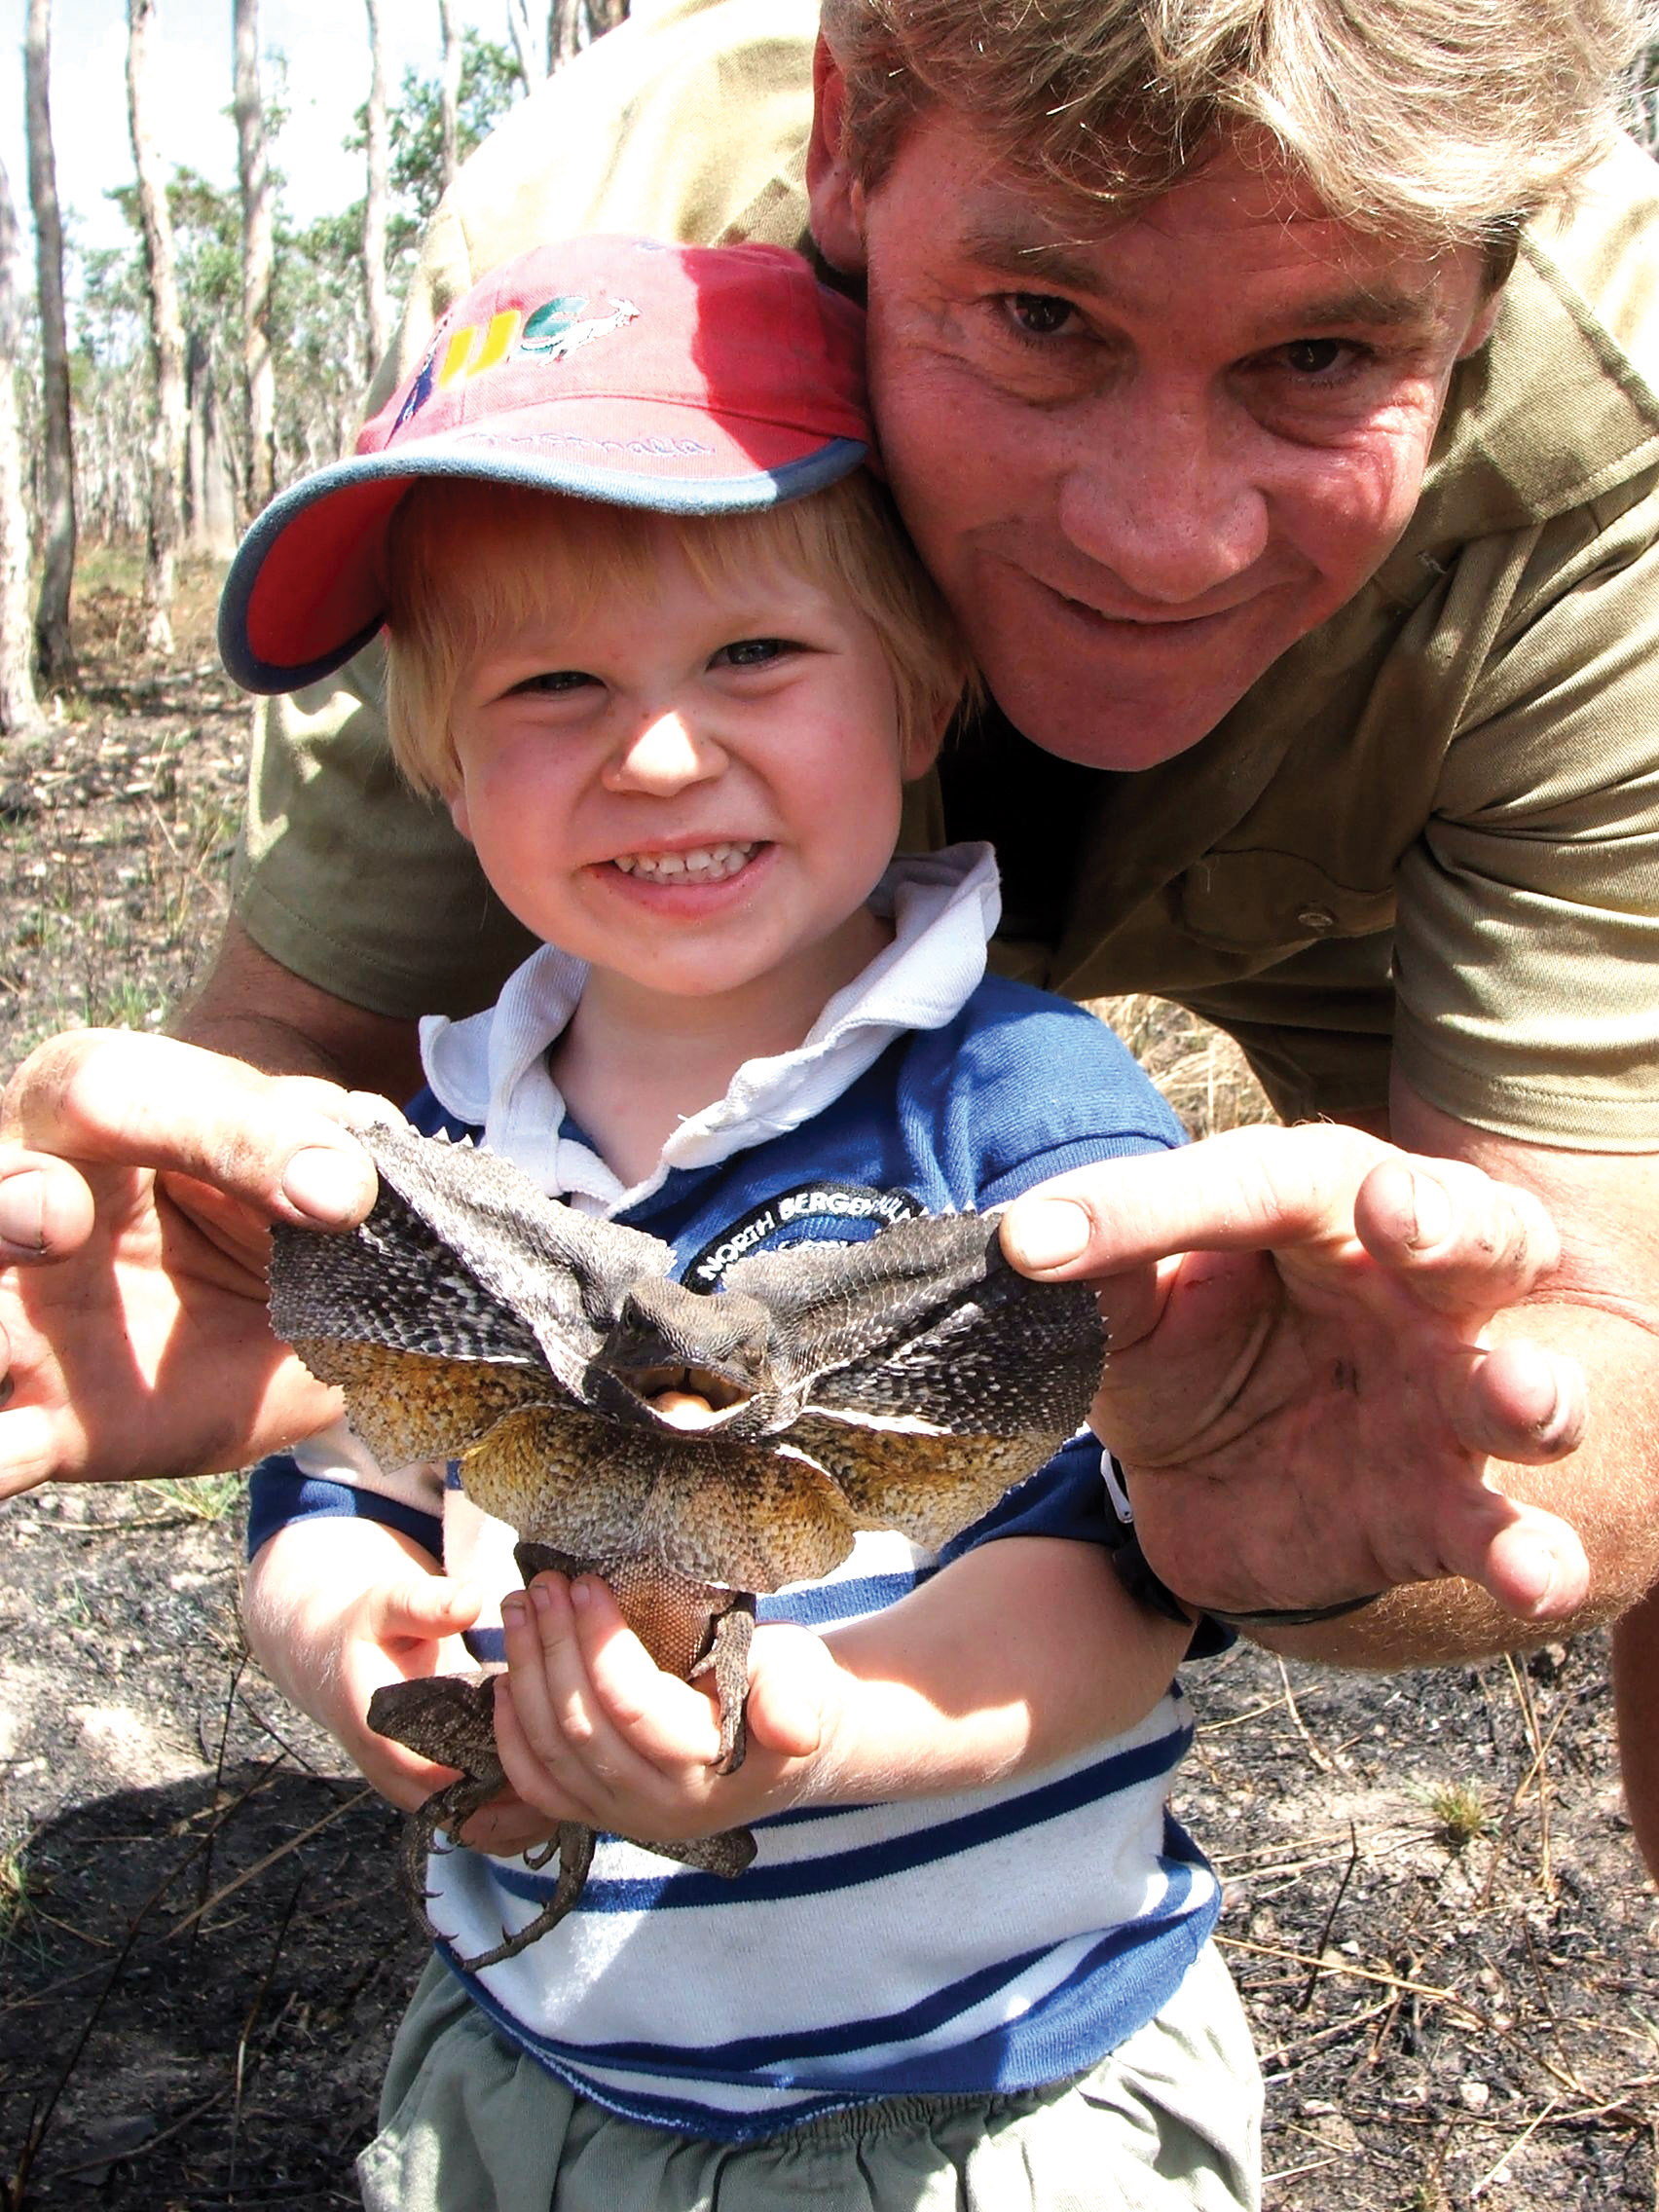 Steve Irwin with his son Robert at Australia Zoo on August 2, 2006, in Beerwah, Australia | Source: Getty Images